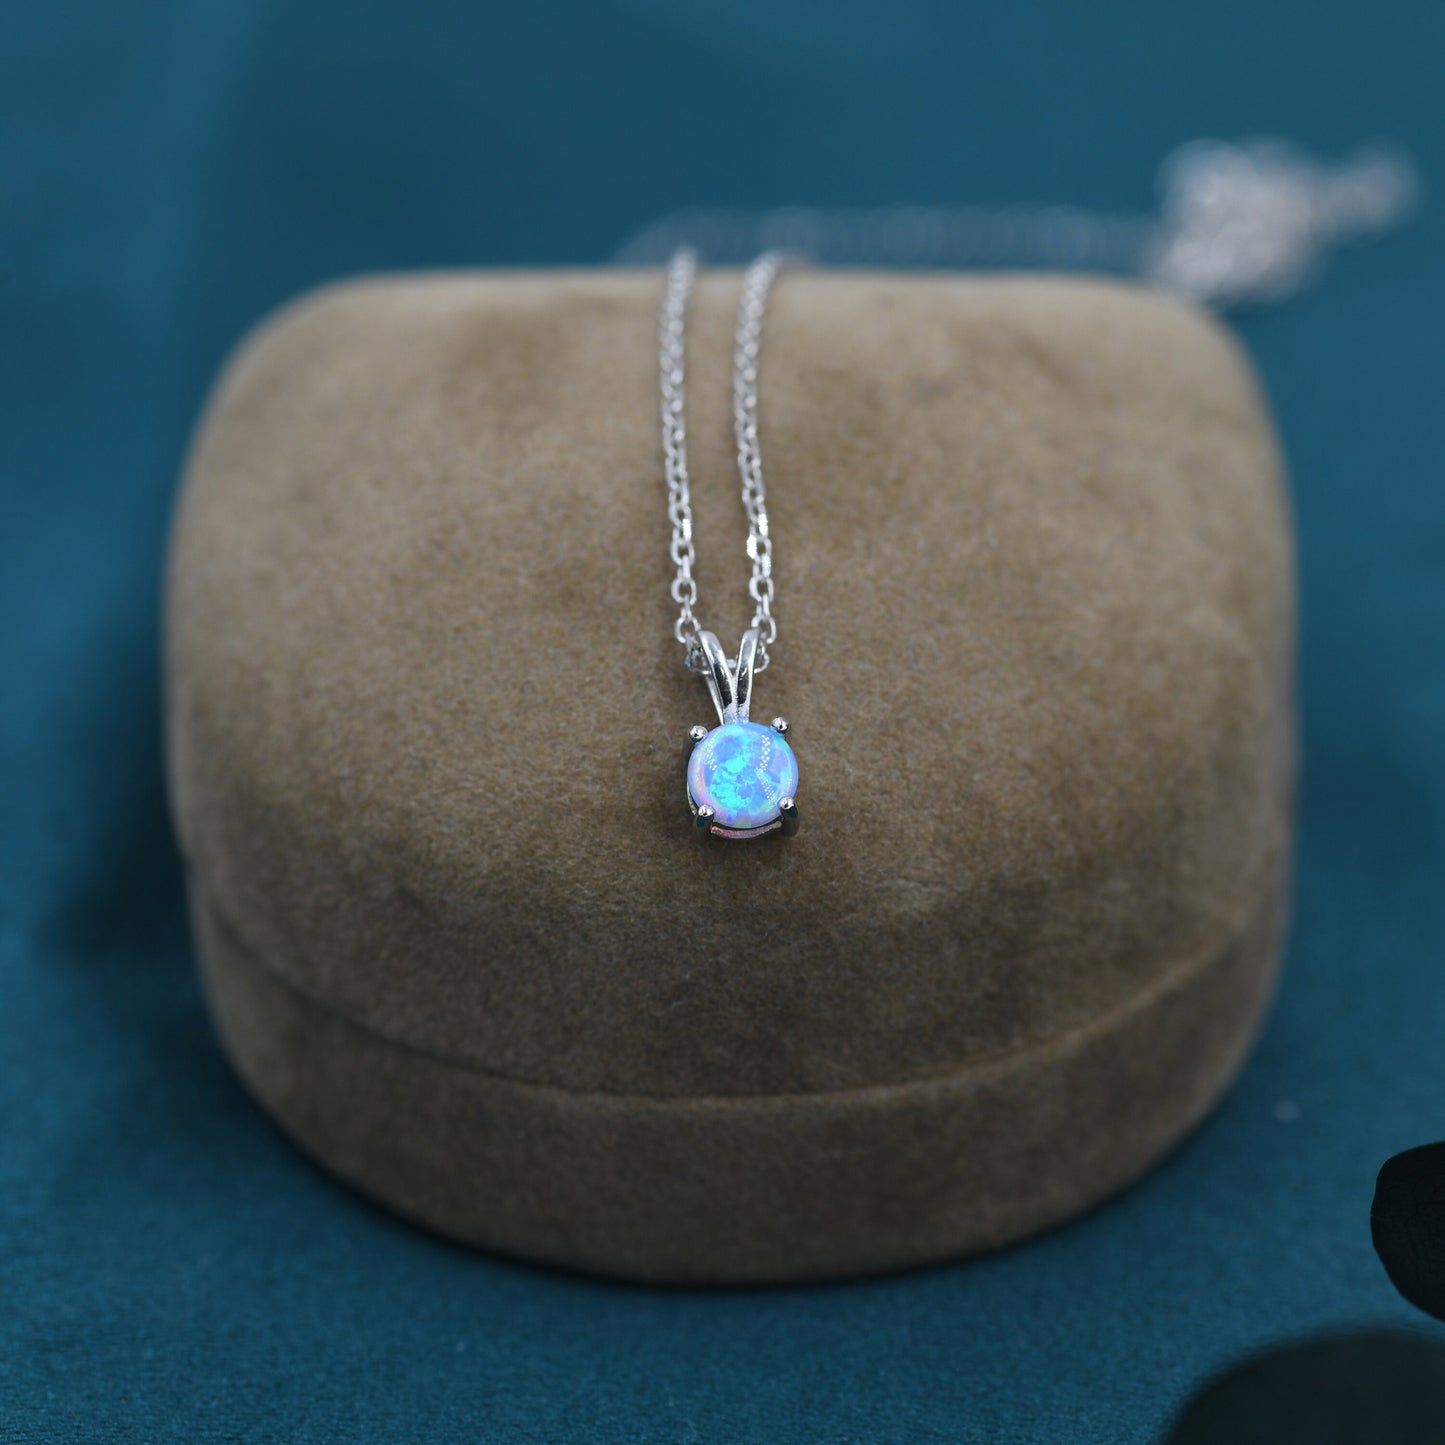 Tiny Blue Opal Pendant Necklace in Sterling Silver, 5mm Lab Opal Necklace,  Single Opal Necklace, Fire Opal Necklace